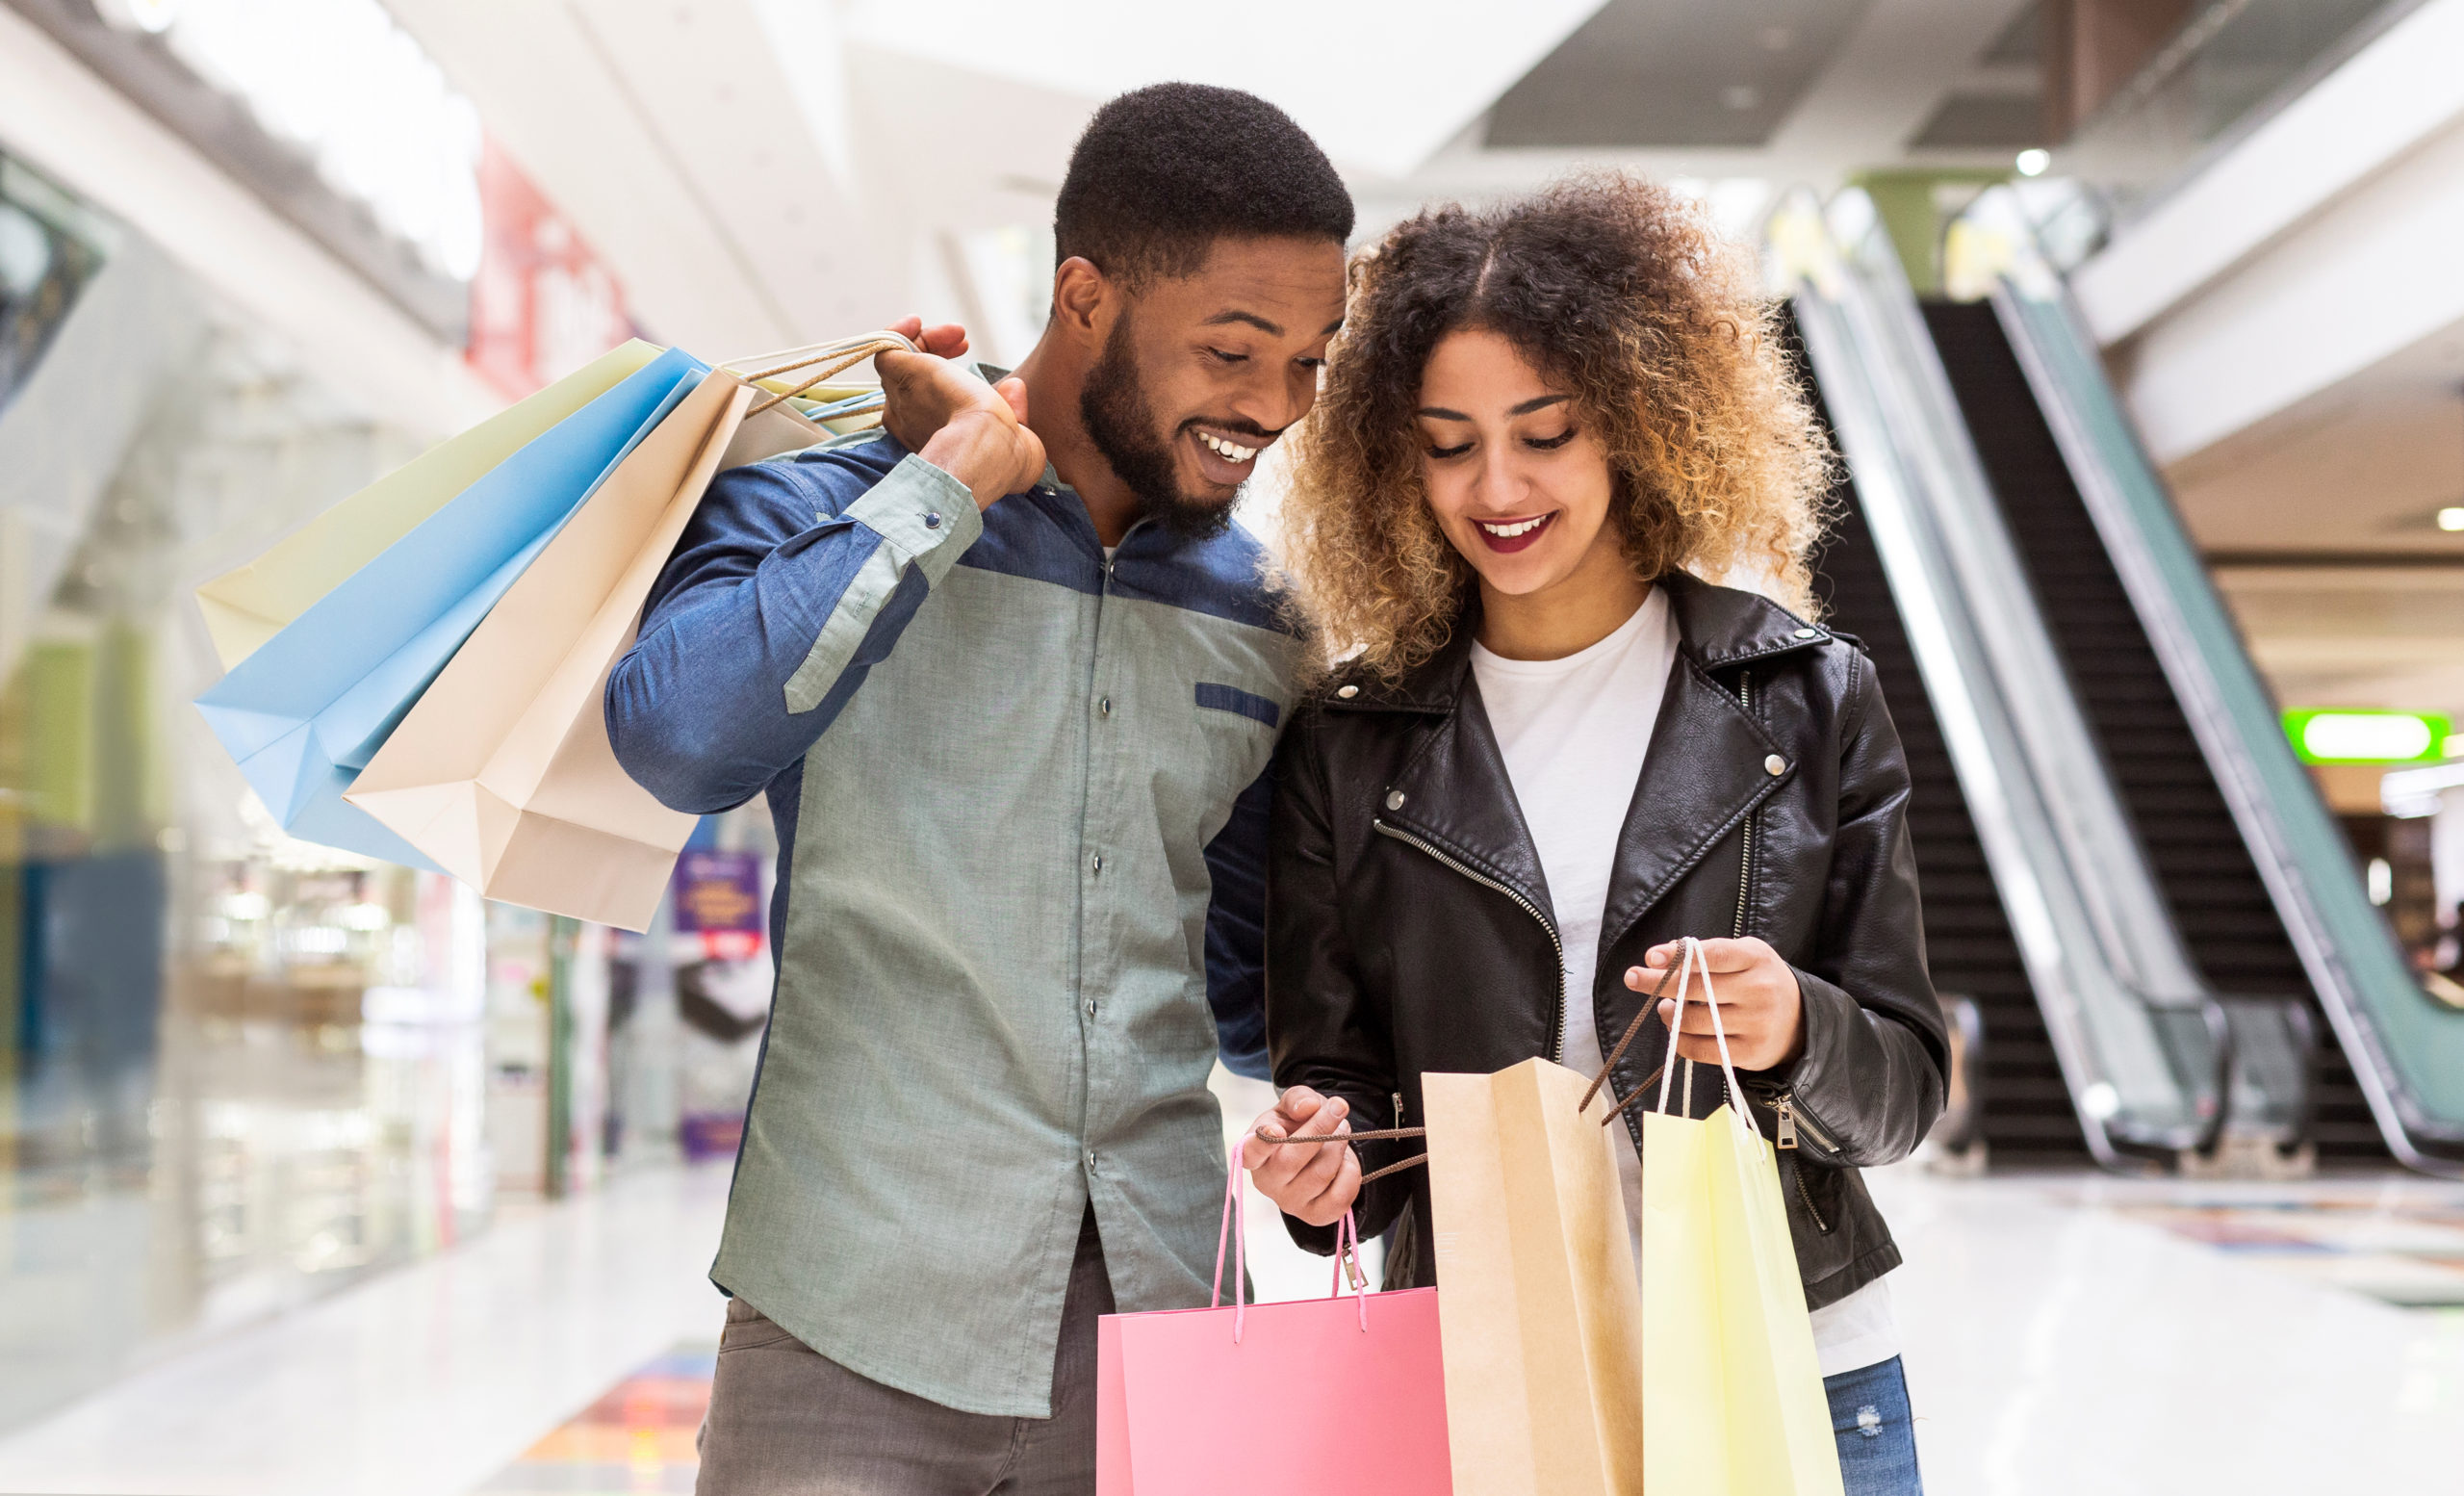 Couple Shopping in Mall stops to look into shopping bags happily